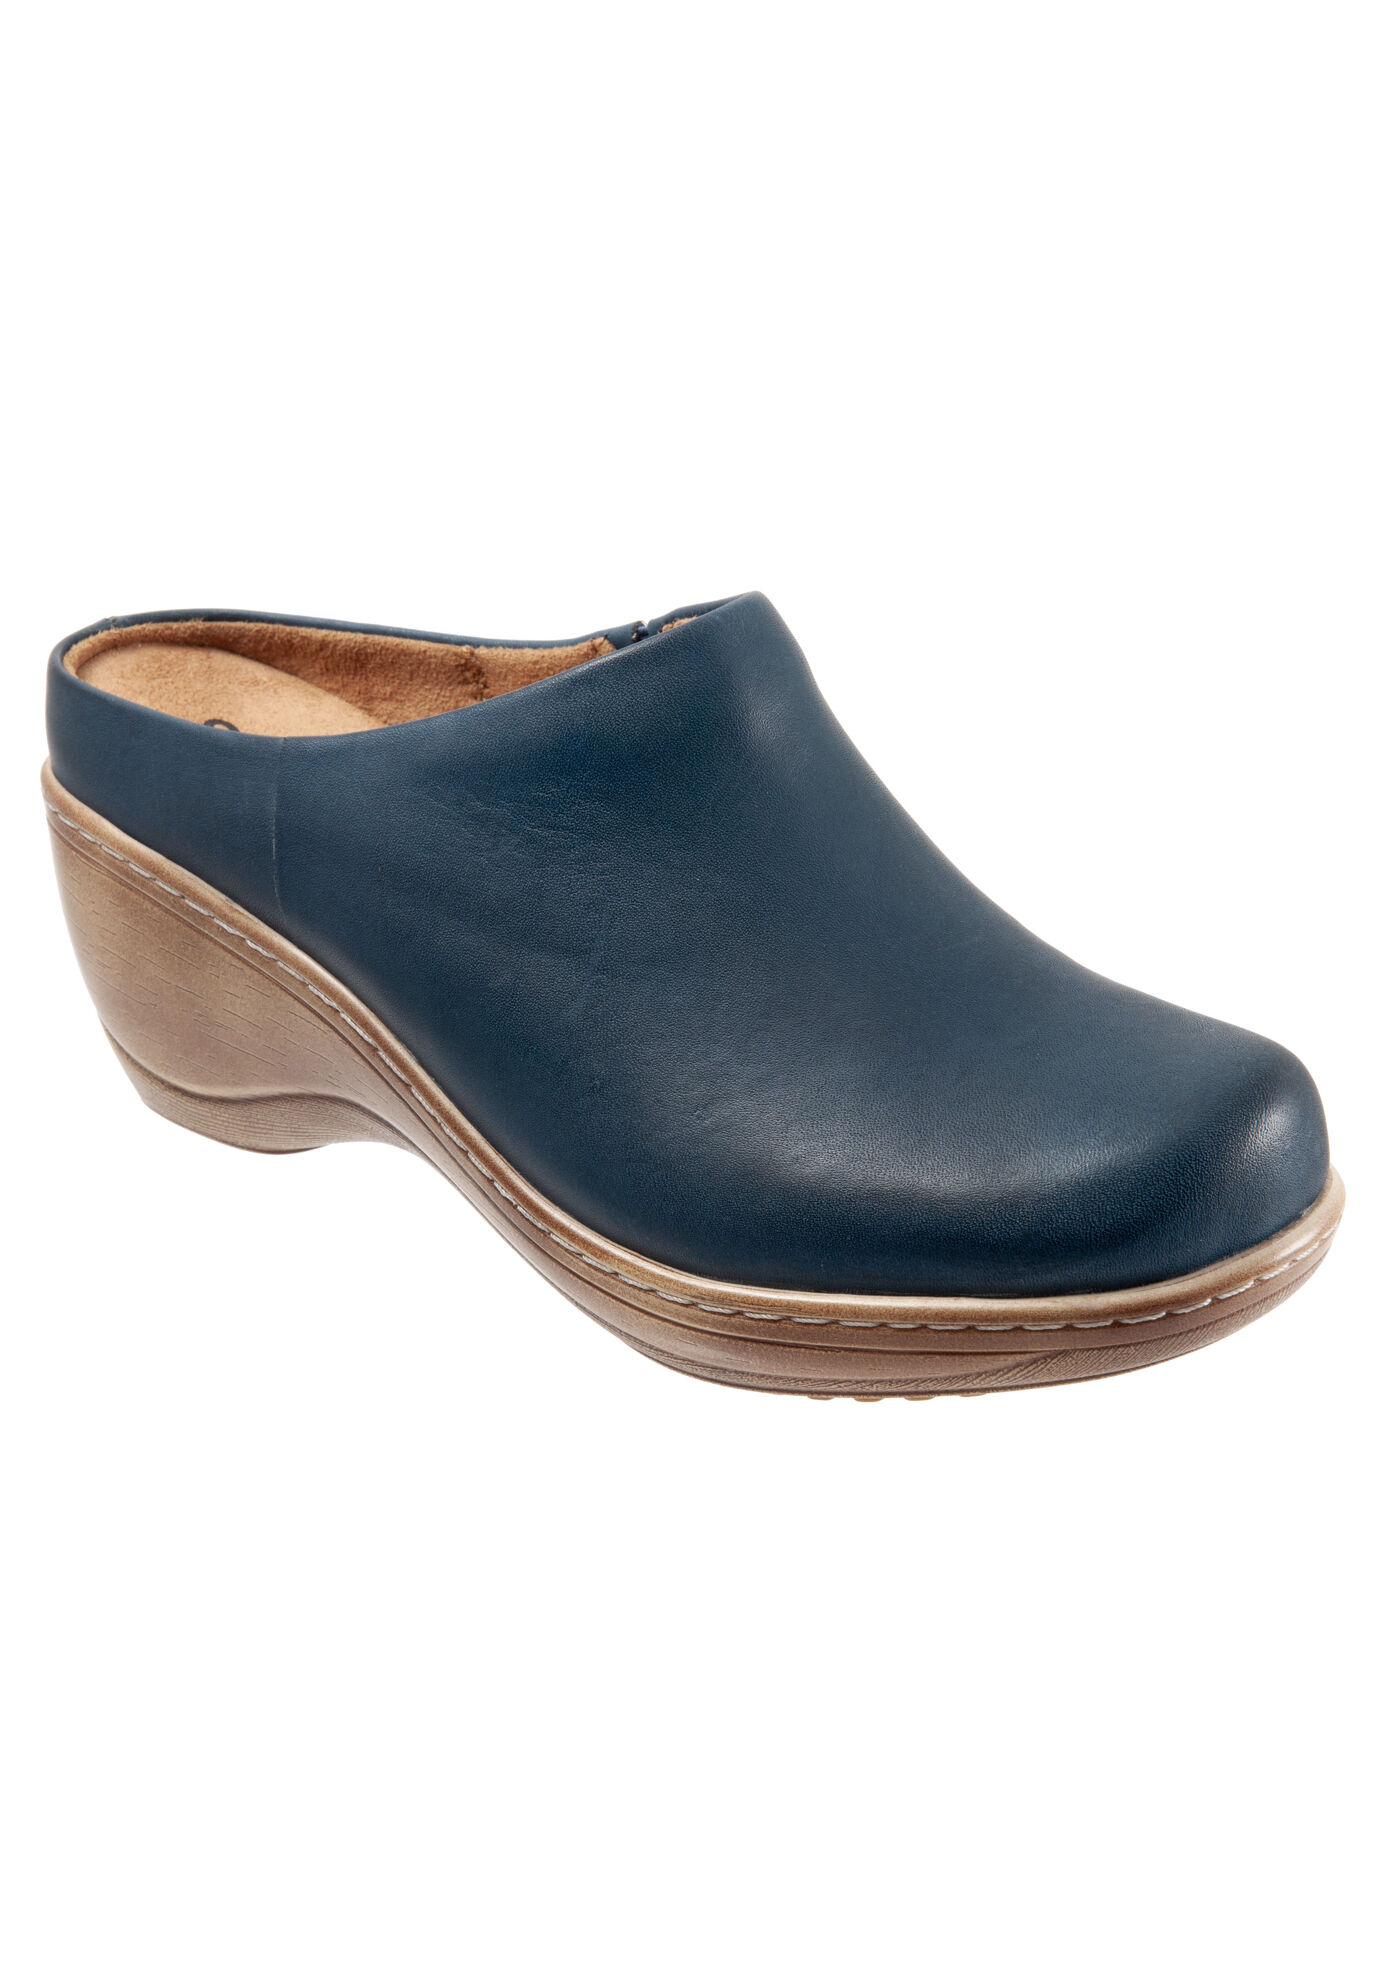 Extra Wide Width Women's Madison Clog by SoftWalk in Navy (Size 6 1/2 WW)